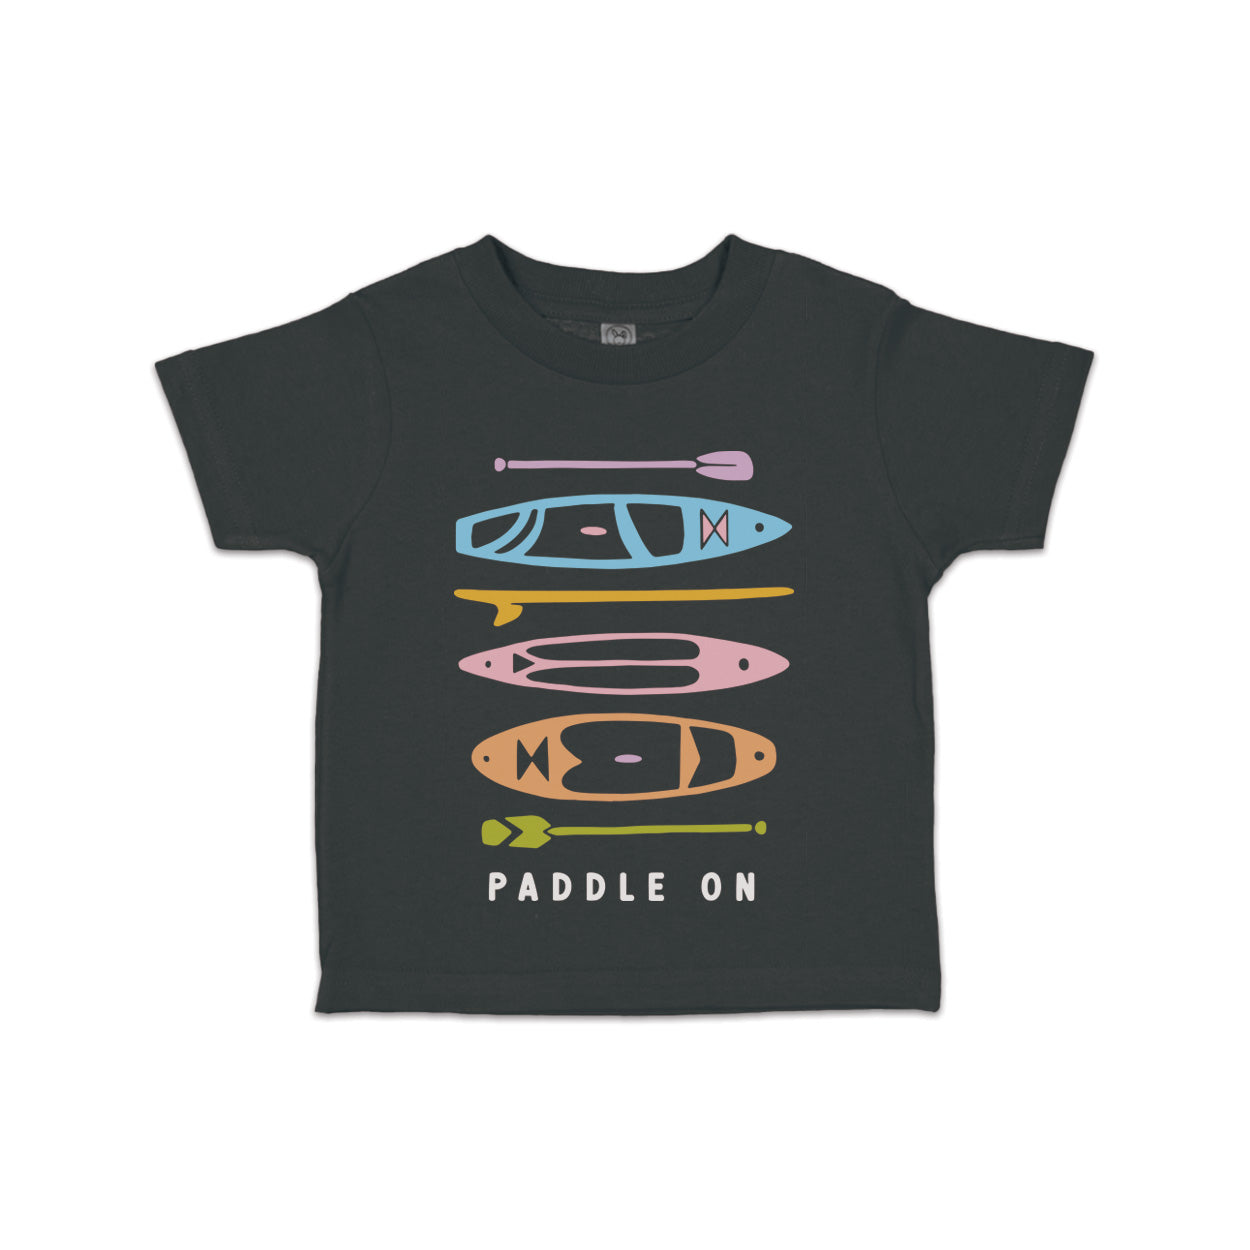 Paddle On Toddler Tee